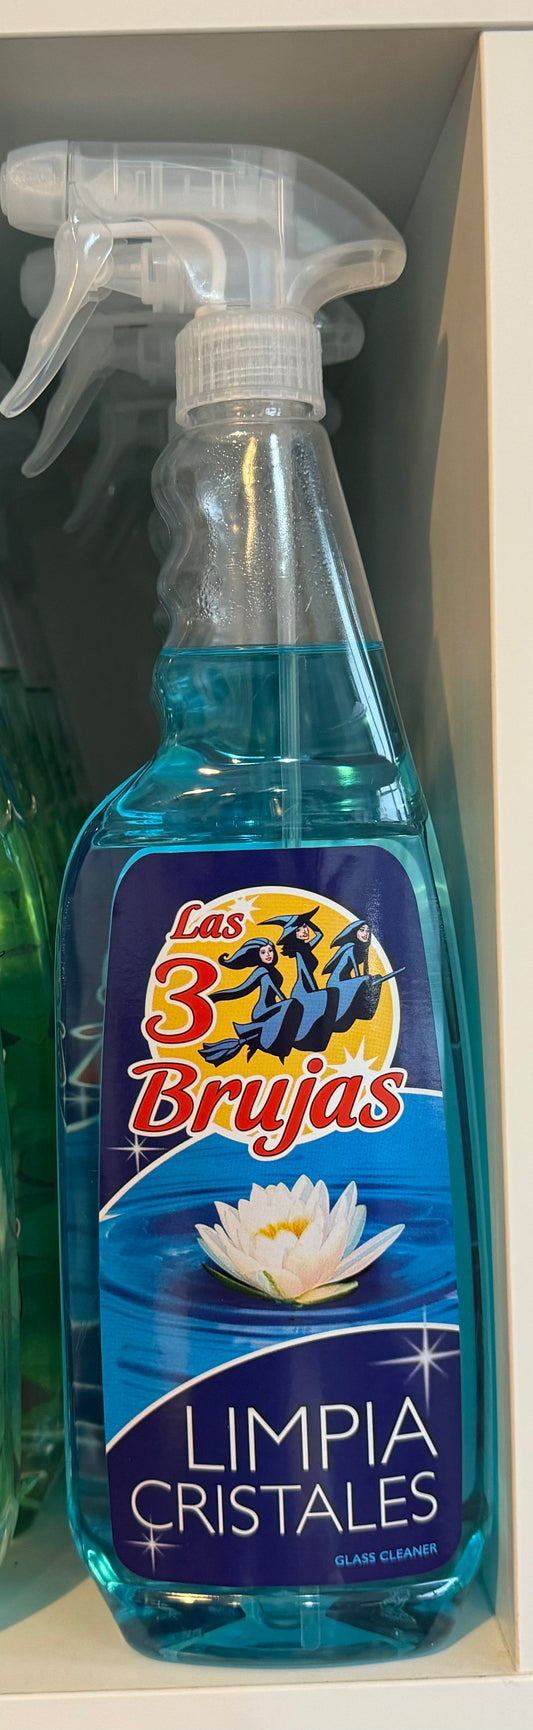 3 brujas glass cleaner